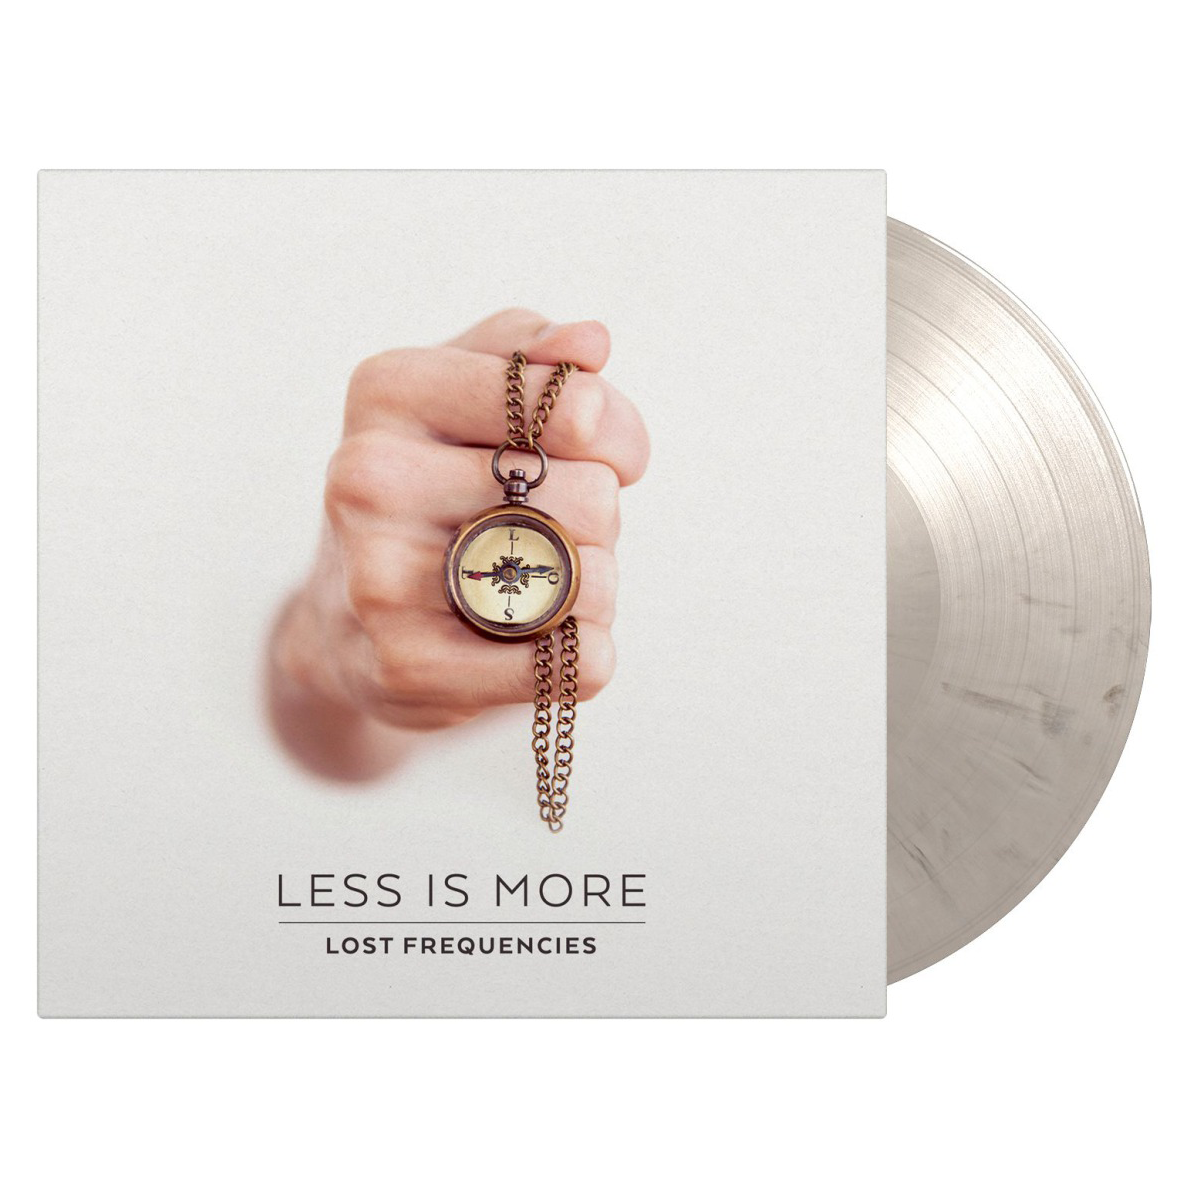 Lost Frequencies - Less Is More: Limited Edition White + Black Marbled Vinyl 2LP